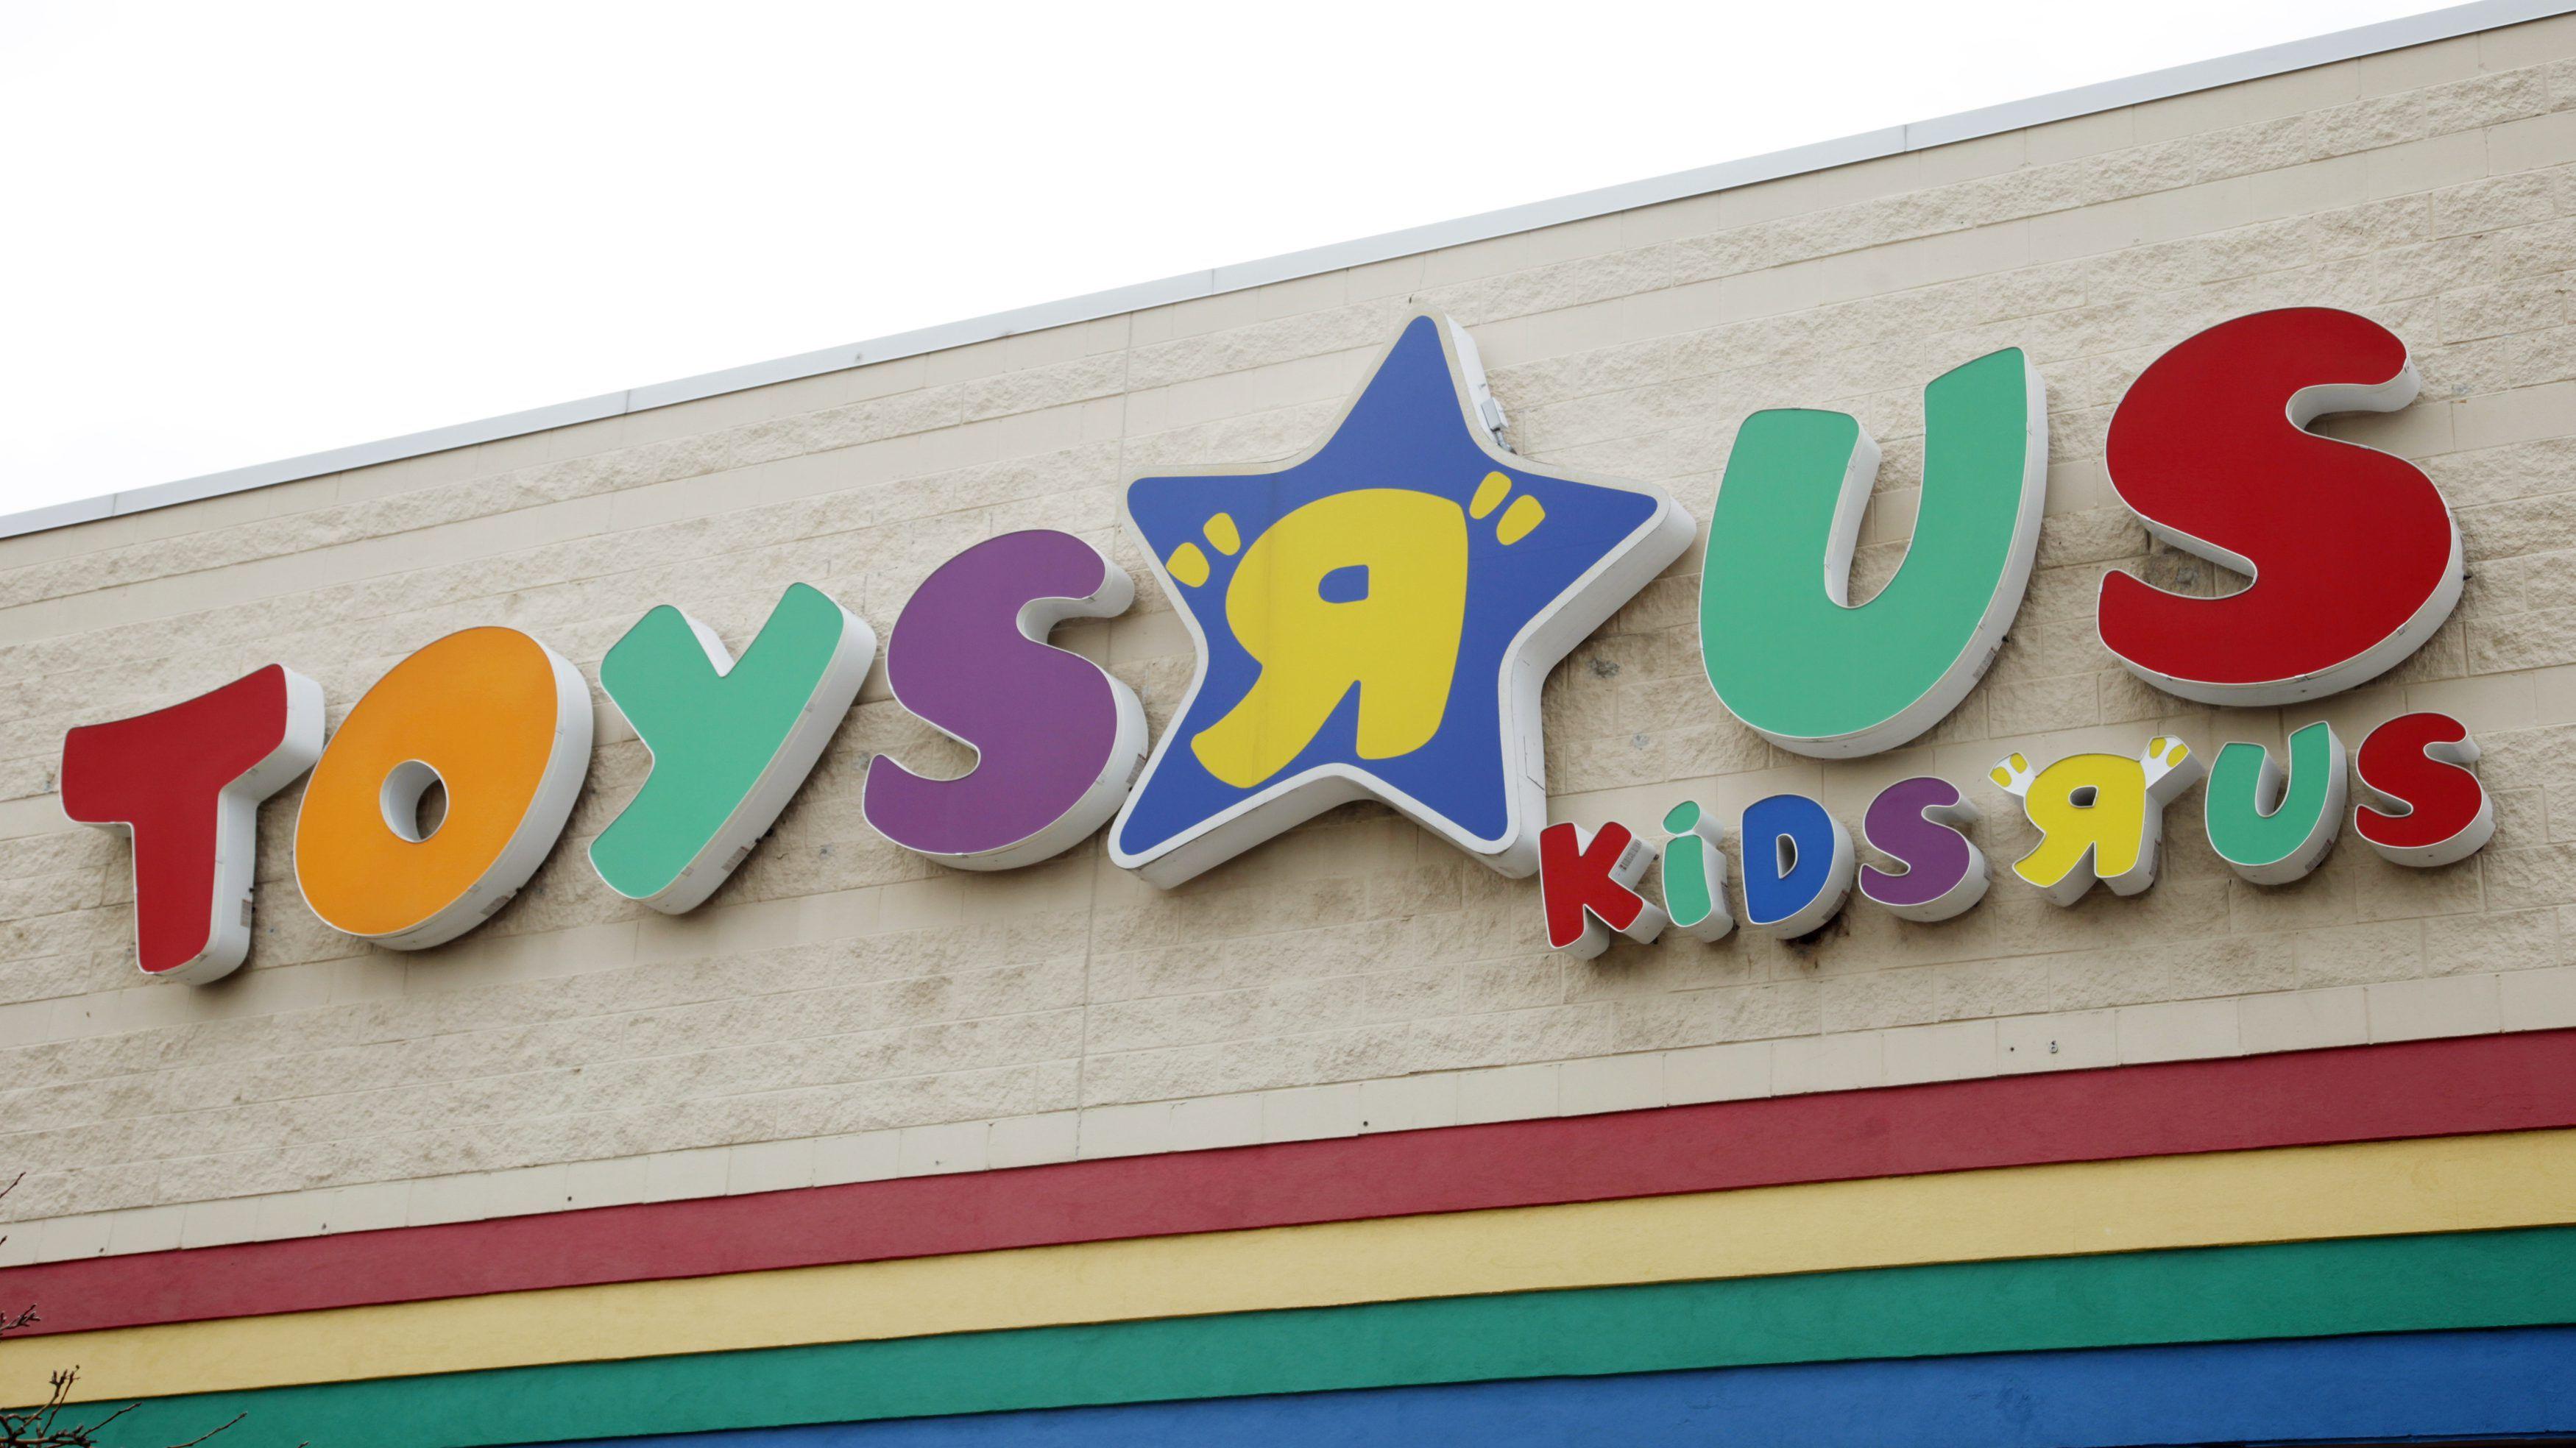 Old Toys R Us Logo - Toys-R-Us Files for BANKRUPTCY | AM 1180 Radio